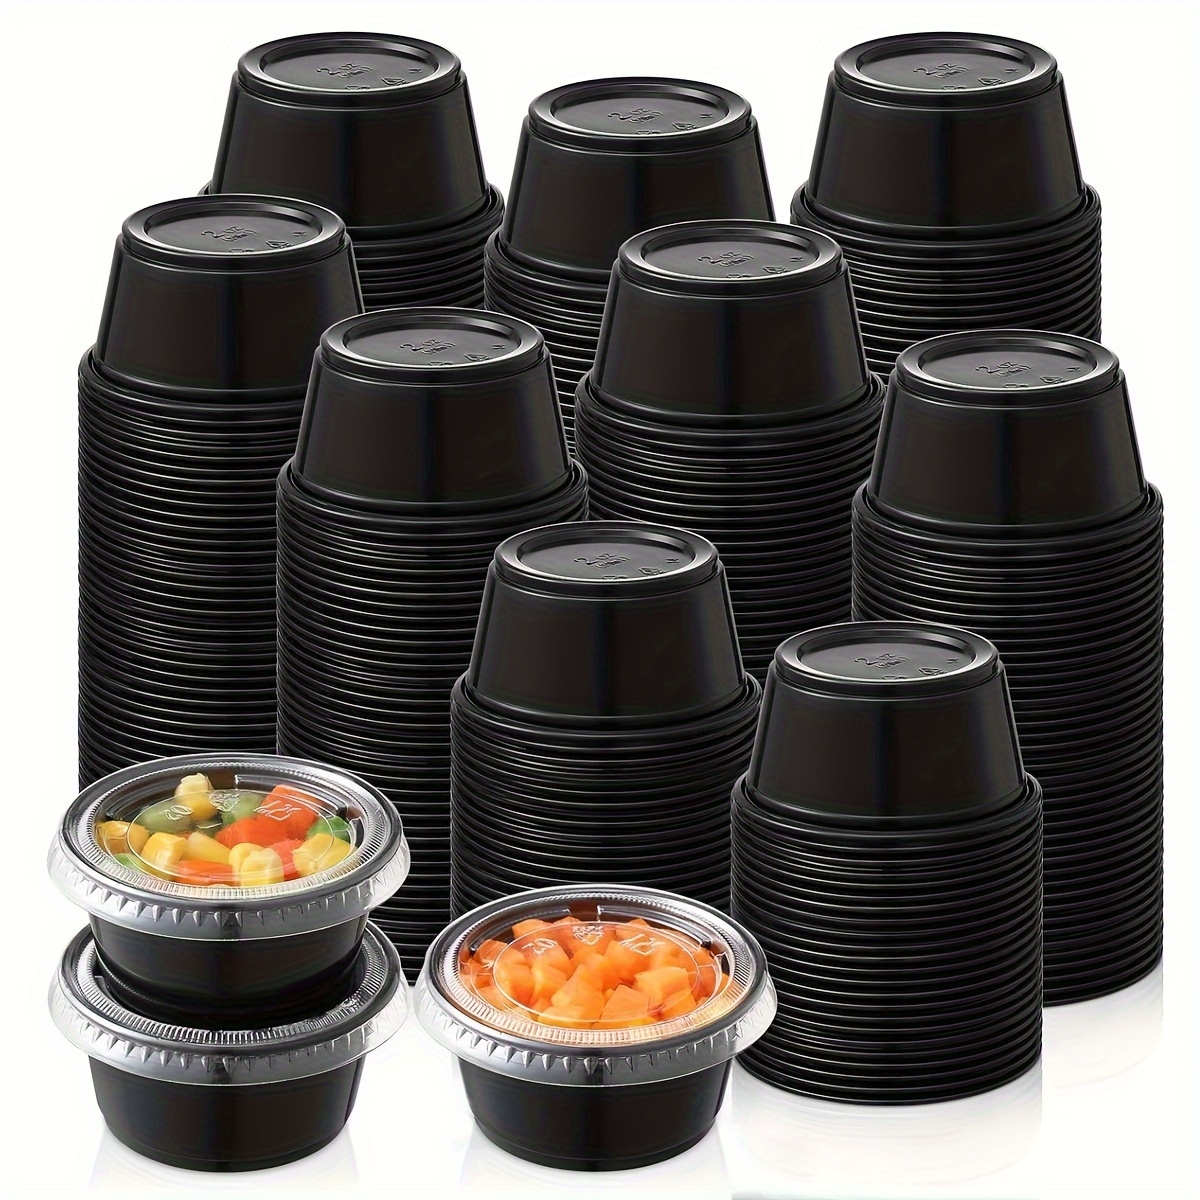 Glotoch Soup Containers With Lids, 48 Pack 8 oz(1 Cup) Deli Containers, To  Go Containers, Freezer Containers For Food-Microwave, Freezer & Dishwasher